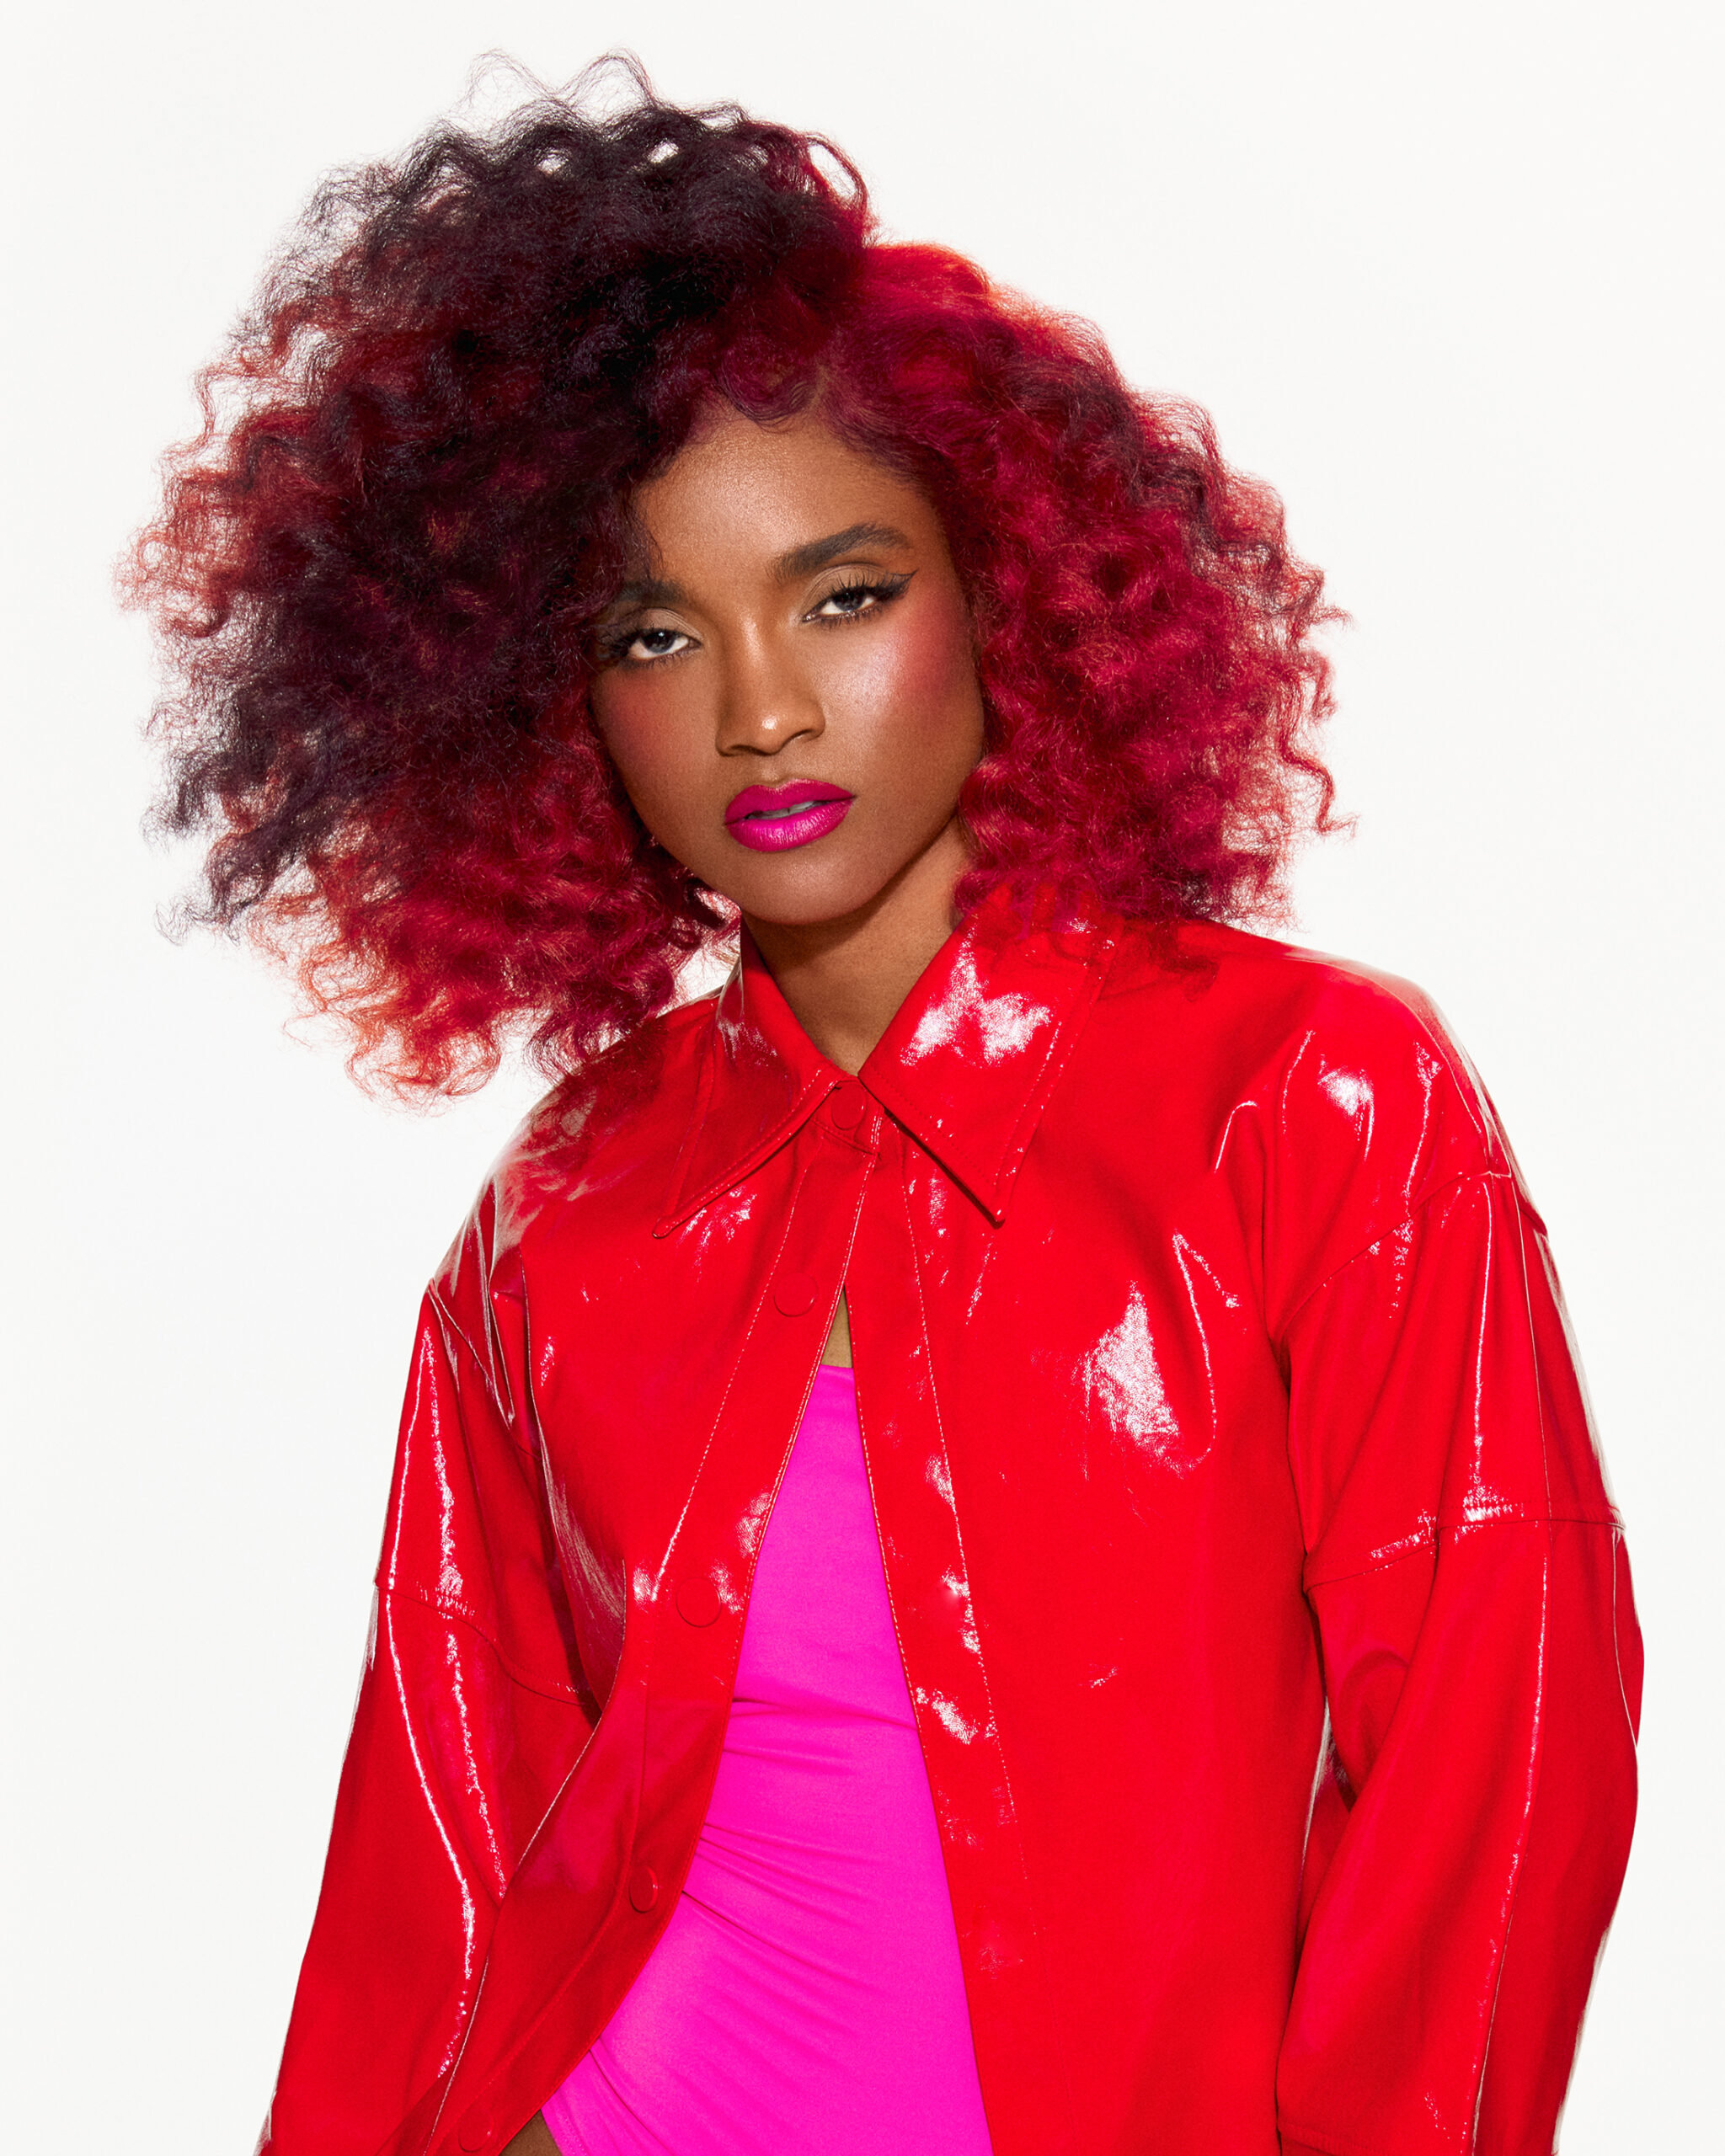 Image of model with curly red hair wearing a red and pink outfit